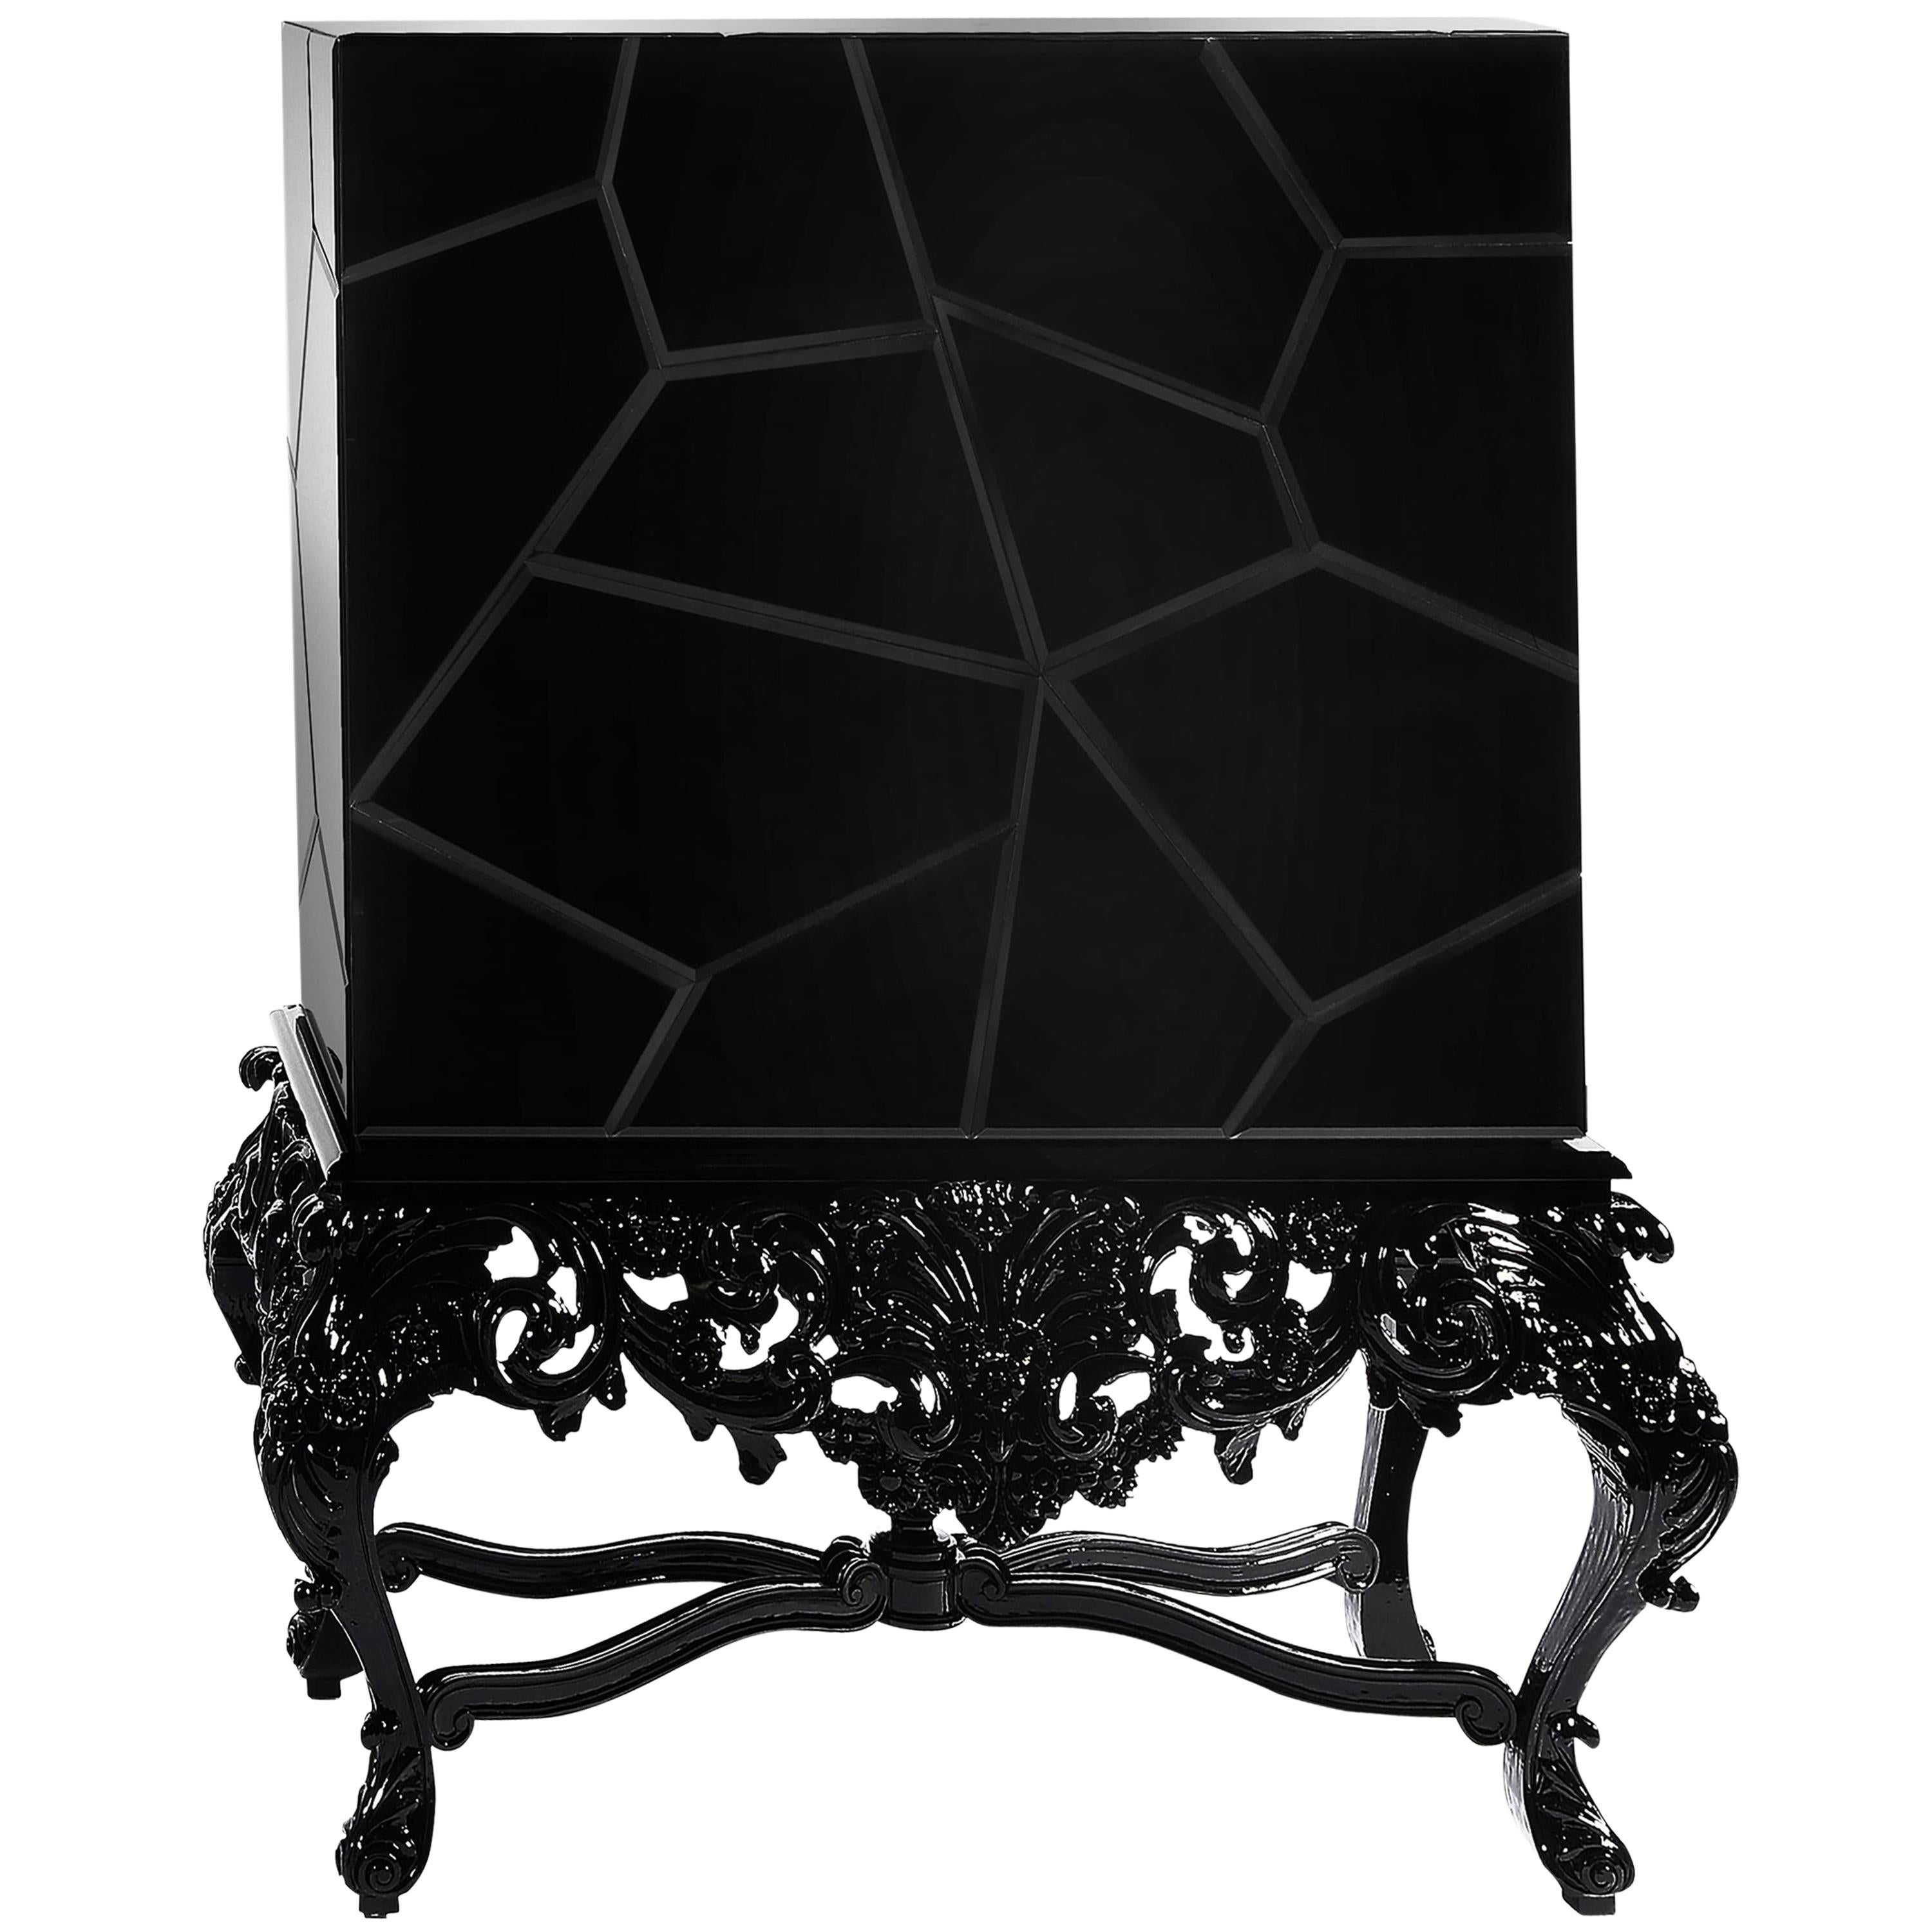 The Victoria Cabinet is a modern take on Victorian style, a play between old and new with an unpredictable pop of color. With a mahogany-crafted structure and coated in a sleek black lacquered beveled glass, it features a pair of overlay doors whose